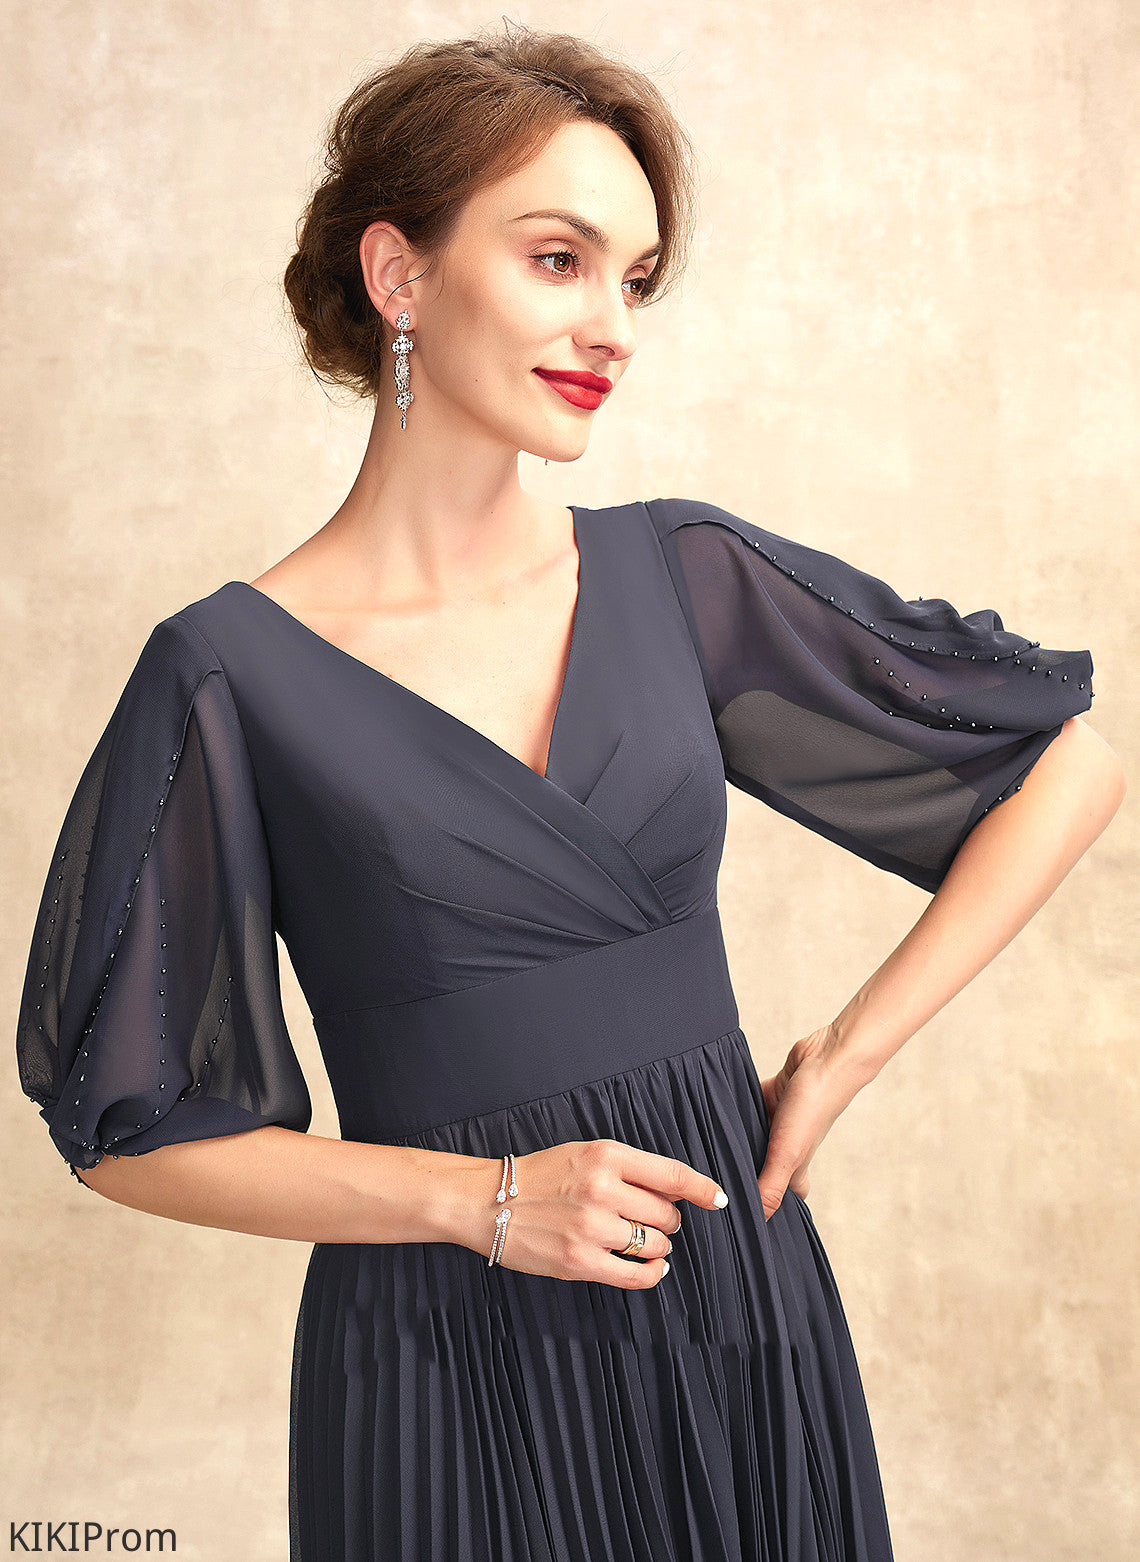 Bride Tea-Length A-Line V-neck Dress of With Kelsey the Mother of the Bride Dresses Mother Pleated Chiffon